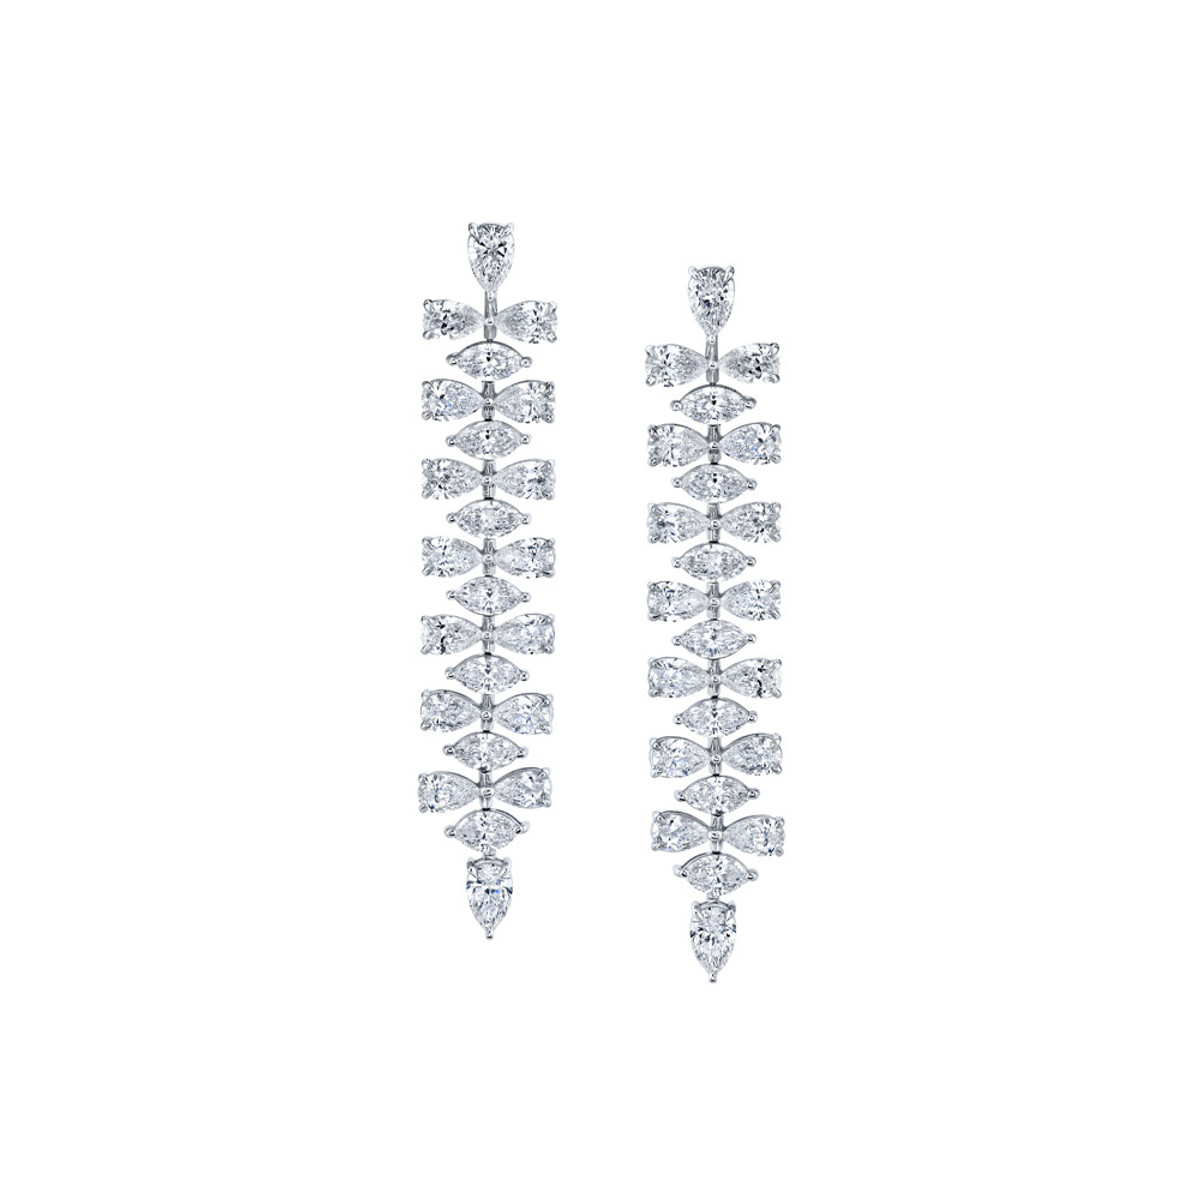 Hyde Park Collection 18K White Gold Diamond Drop Earrings-58175